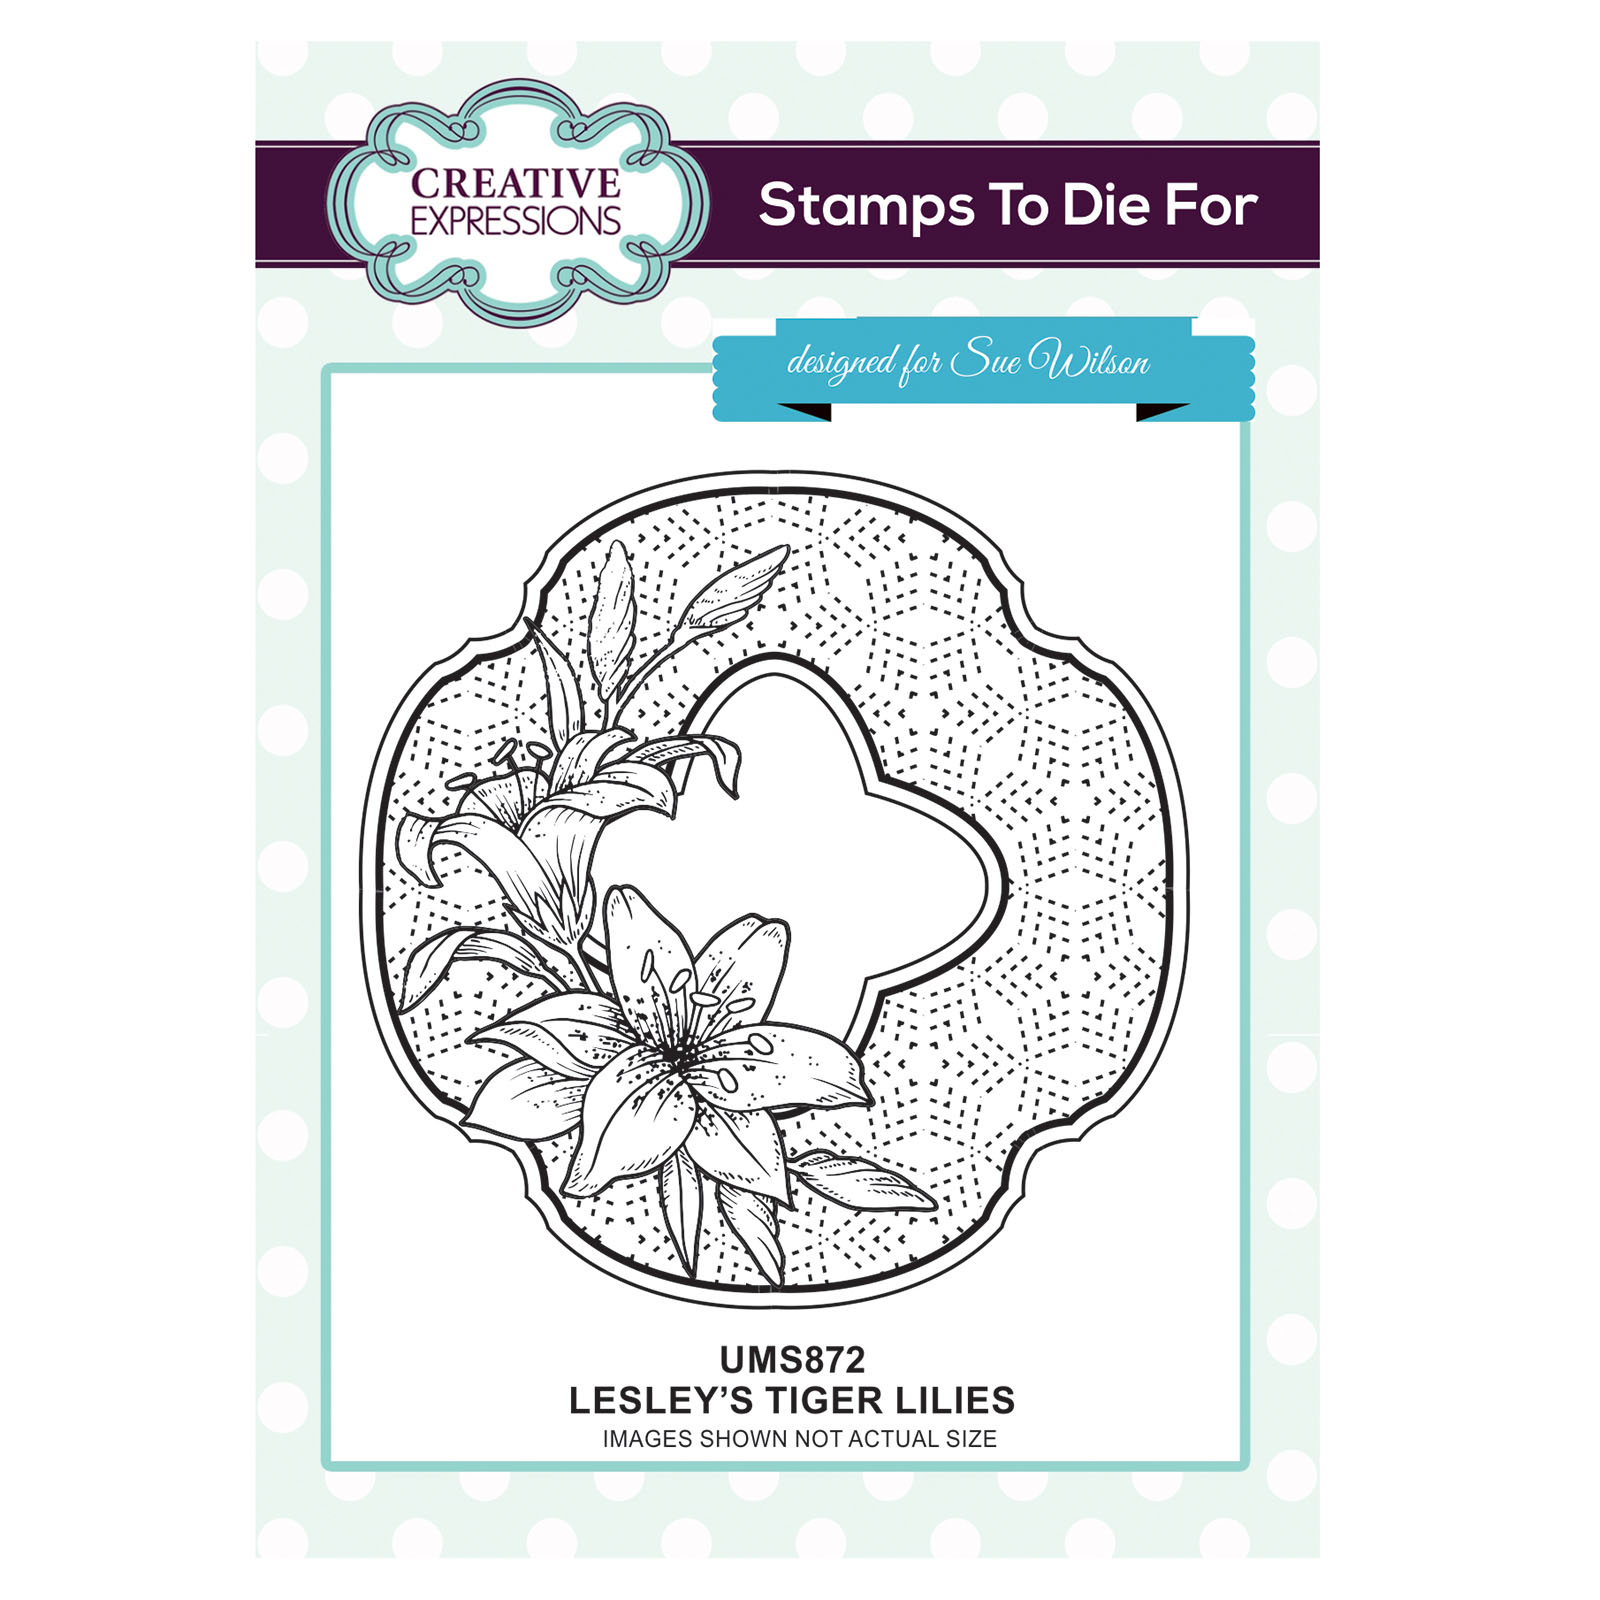 Creative Expressions • Stamps to die for Lesley's Tiger Lilies